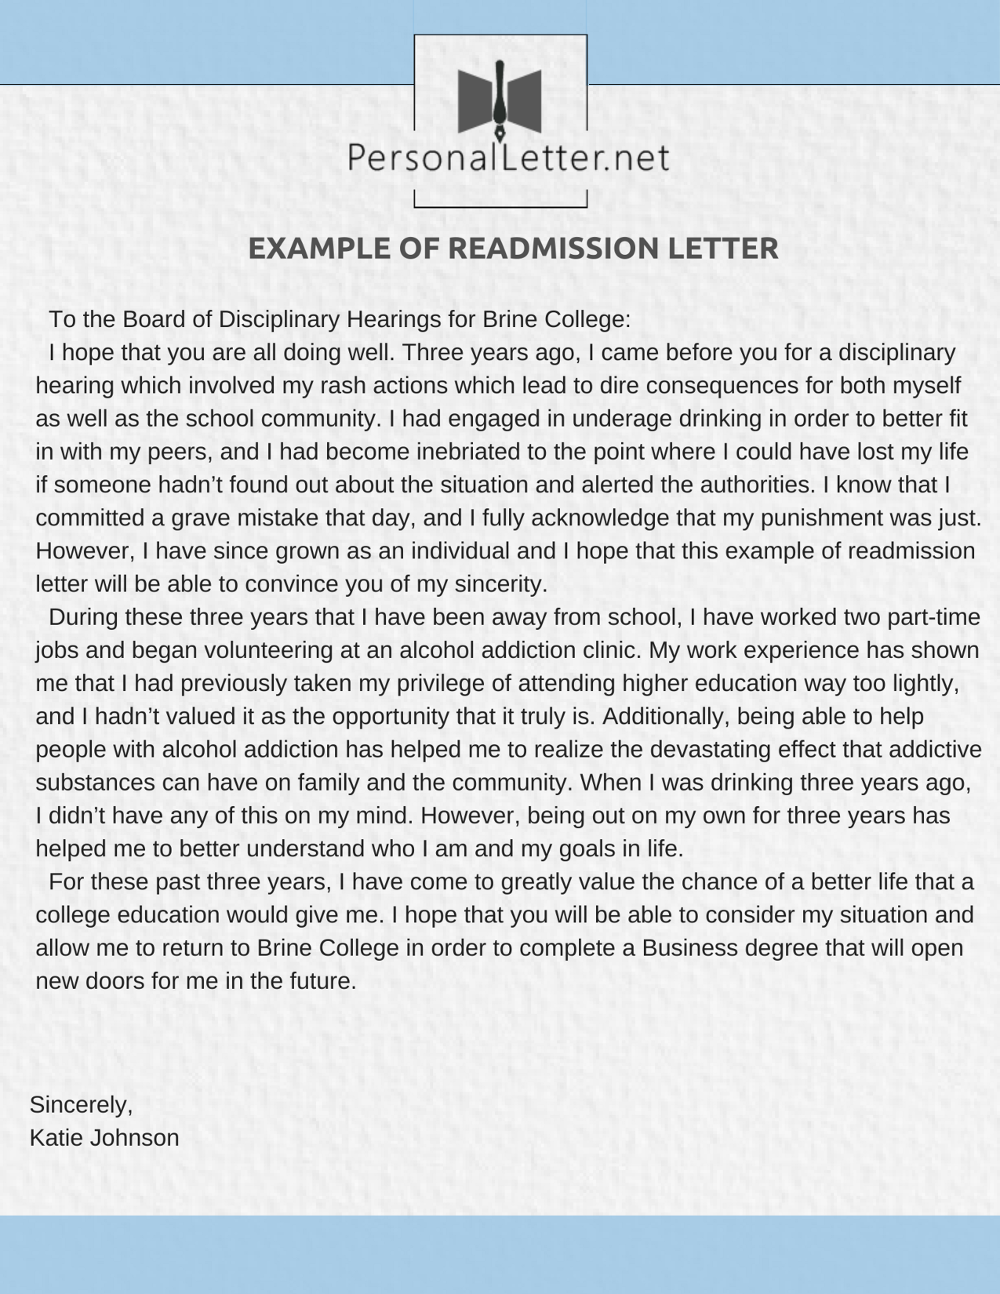 Readmission Letter Writing Readmission Letter Writing on Behance